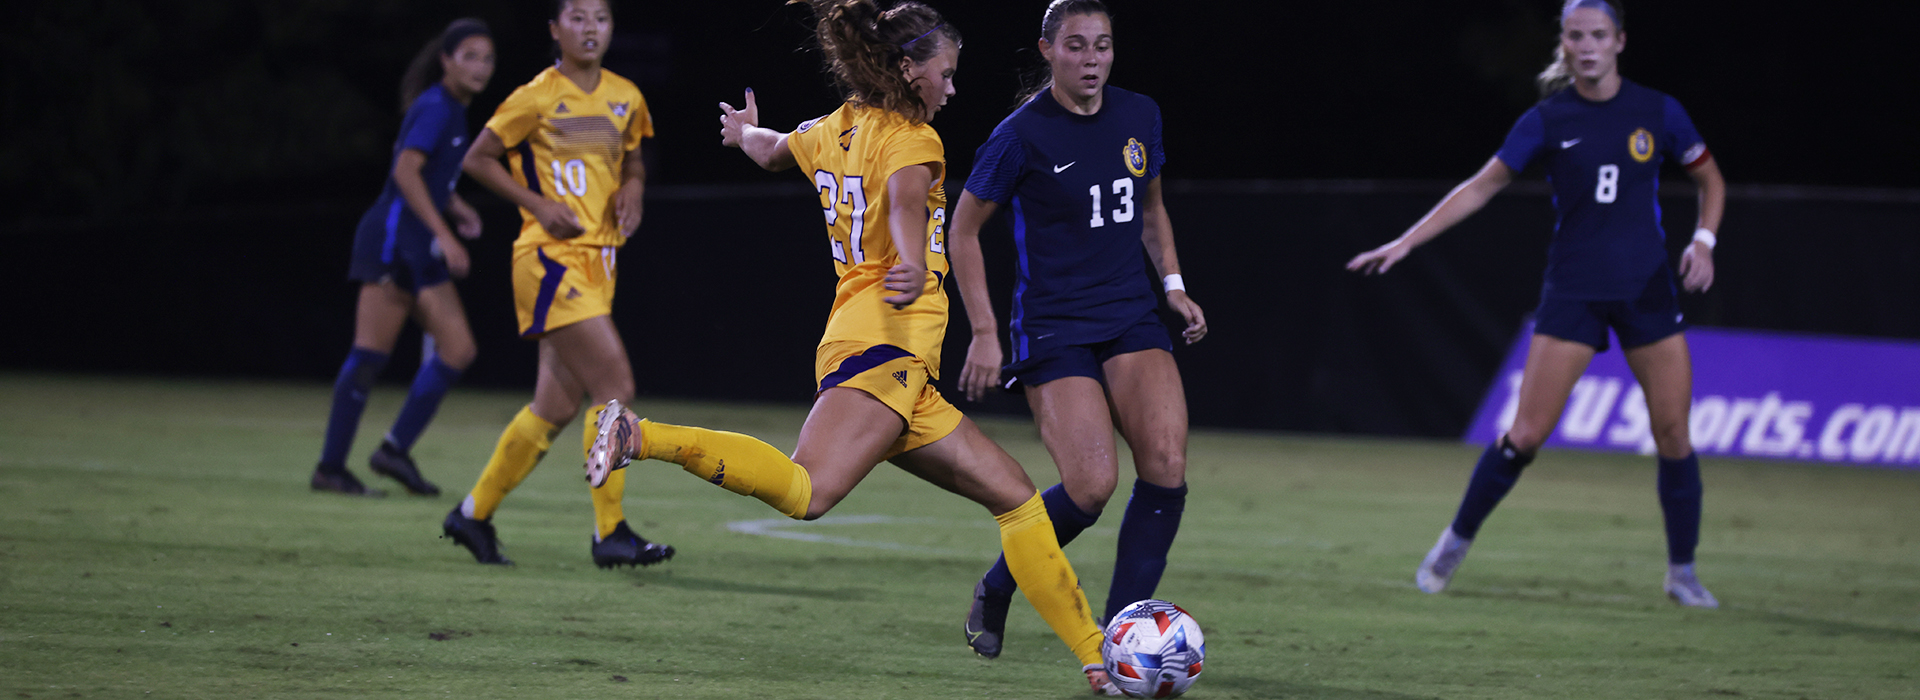 Tech stretches unbeaten streak to five straight with draw against Murray State in seesaw affair